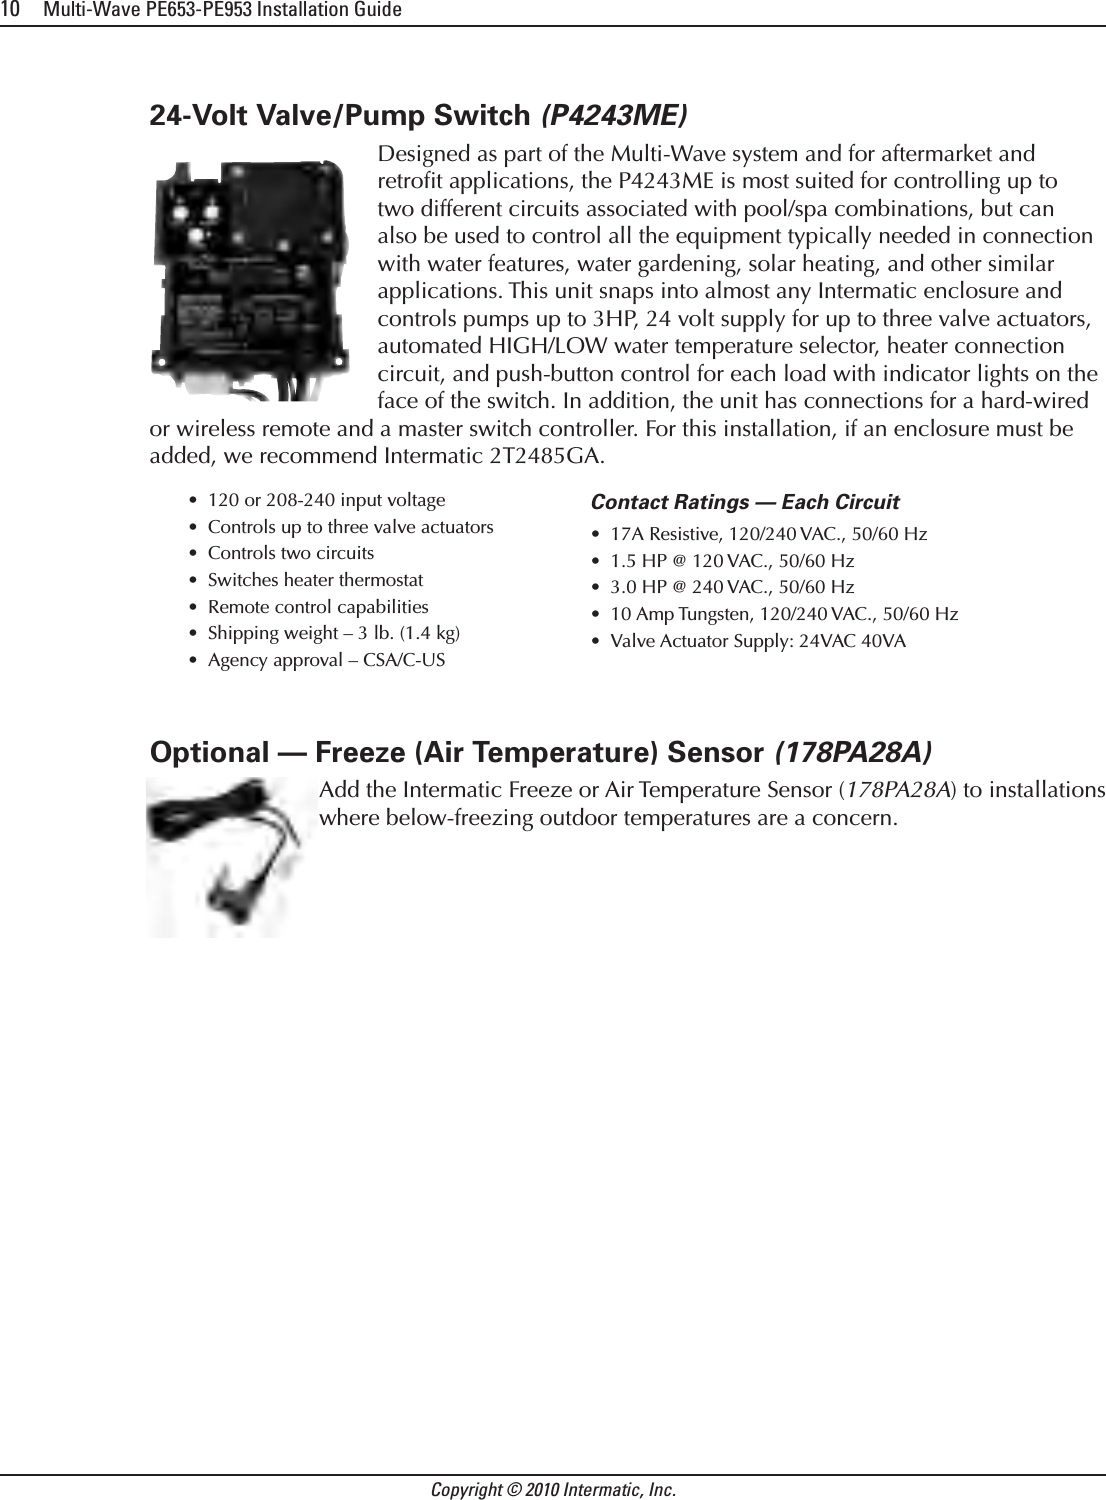 10     Multi-Wave PE653-PE953 Installation GuideCopyright © 2010 Intermatic, Inc.24-Volt Valve/Pump Switch (P4243ME)Designed as part of the Multi-Wave system and for aftermarket and retroﬁt applications, the P4243ME is most suited for controlling up to two different circuits associated with pool/spa combinations, but can also be used to control all the equipment typically needed in connection with water features, water gardening, solar heating, and other similar applications. This unit snaps into almost any Intermatic enclosure and controls pumps up to 3HP, 24 volt supply for up to three valve actuators, automated HIGH/LOW water temperature selector, heater connection circuit, and push-button control for each load with indicator lights on the face of the switch. In addition, the unit has connections for a hard-wired or wireless remote and a master switch controller. For this installation, if an enclosure must be added, we recommend Intermatic 2T2485GA.120 or 208-240 input voltage•Controls up to three valve actuators•Controls two circuits•Switches heater thermostat•Remote control capabilities•Shipping weight – 3 lb. (1.4 kg)•Agency approval – CSA/C-US•Contact Ratings — Each Circuit 17A Resistive, 120/240 VAC., 50/60 Hz•1.5 HP @ 120 VAC., 50/60 Hz•3.0 HP @ 240 VAC., 50/60 Hz•10 Amp Tungsten, 120/240 VAC., 50/60 Hz•Valve Actuator Supply: 24VAC 40VA•Optional — Freeze (Air Temperature) Sensor (178PA28A)  Add the Intermatic Freeze or Air Temperature Sensor (178PA28A) to installations where below-freezing outdoor temperatures are a concern.